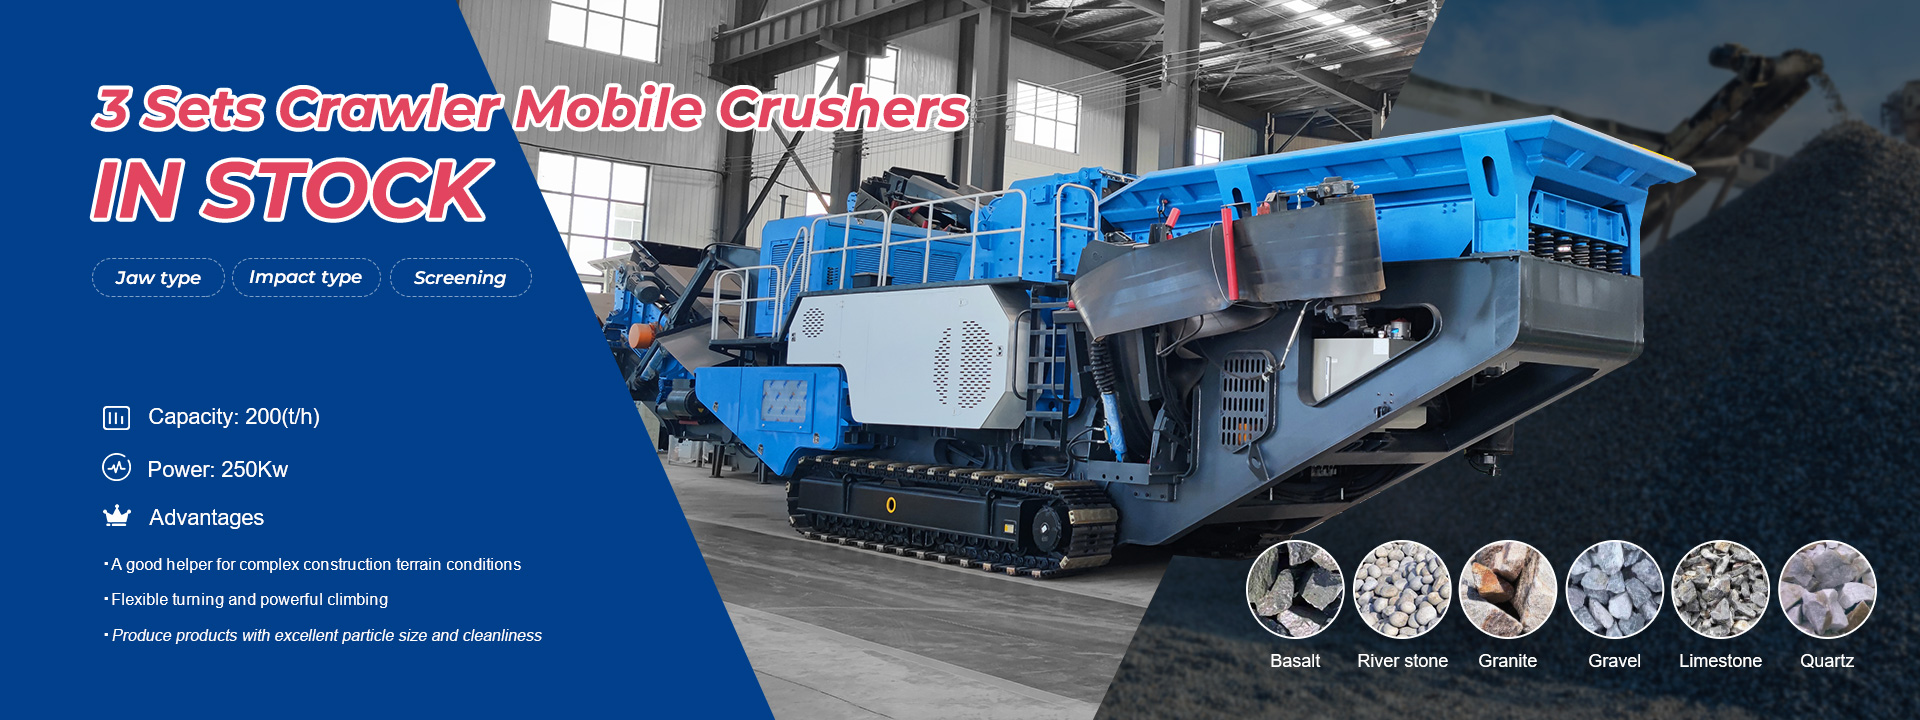 crawler mobile crusher promotions